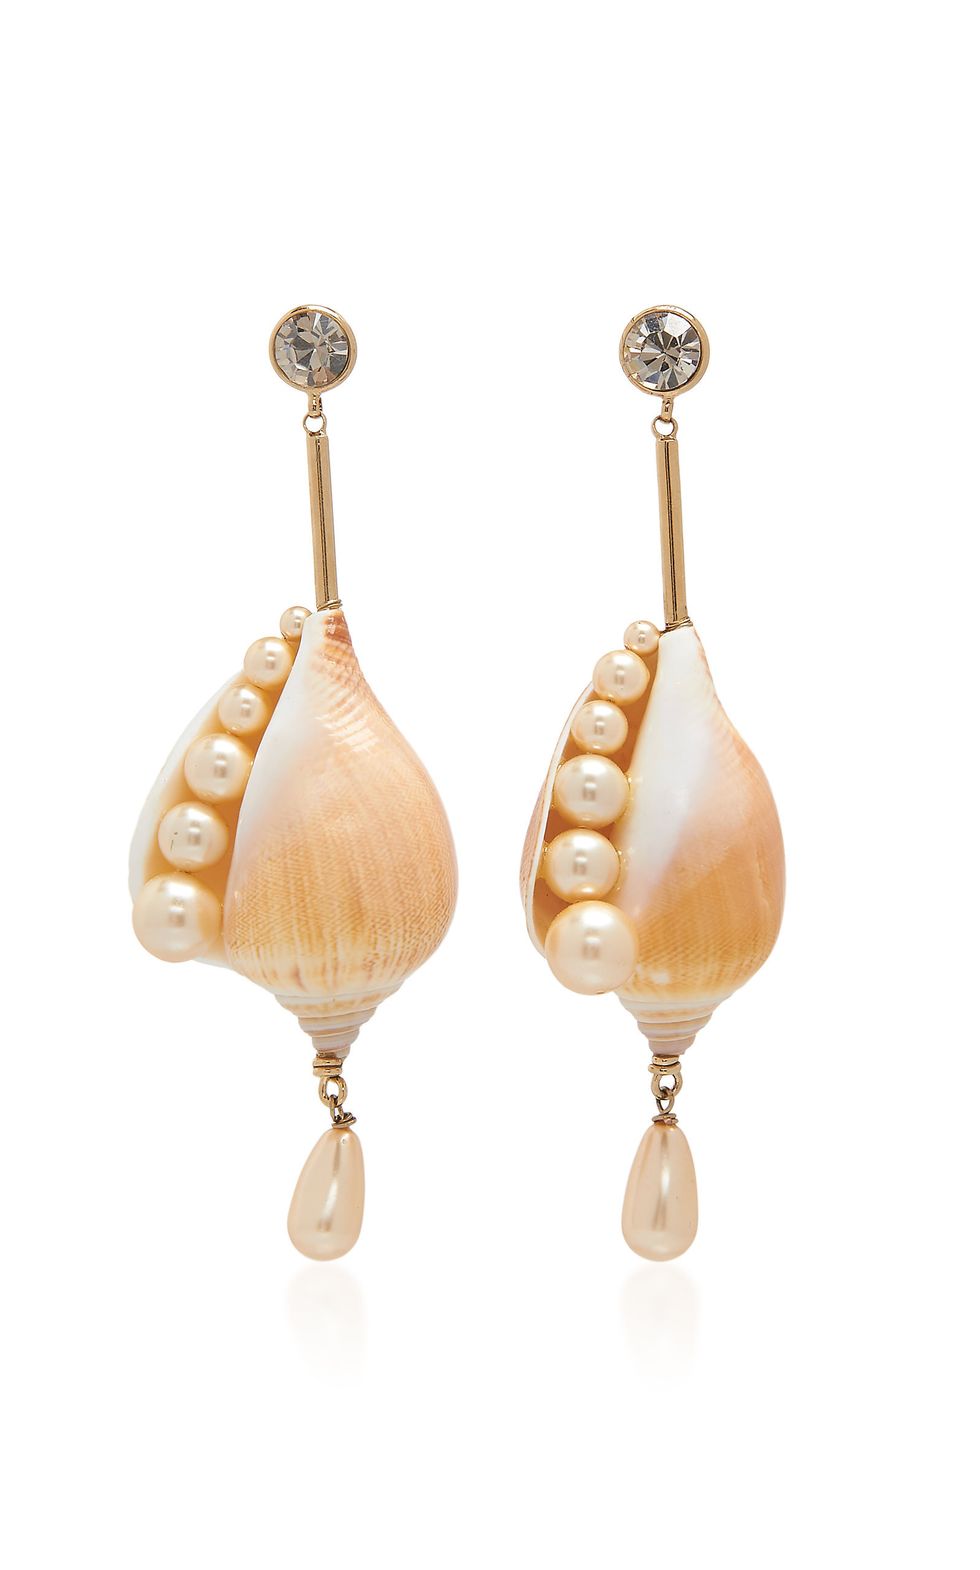 Crystal, Shell And Faux Pearl Earrings